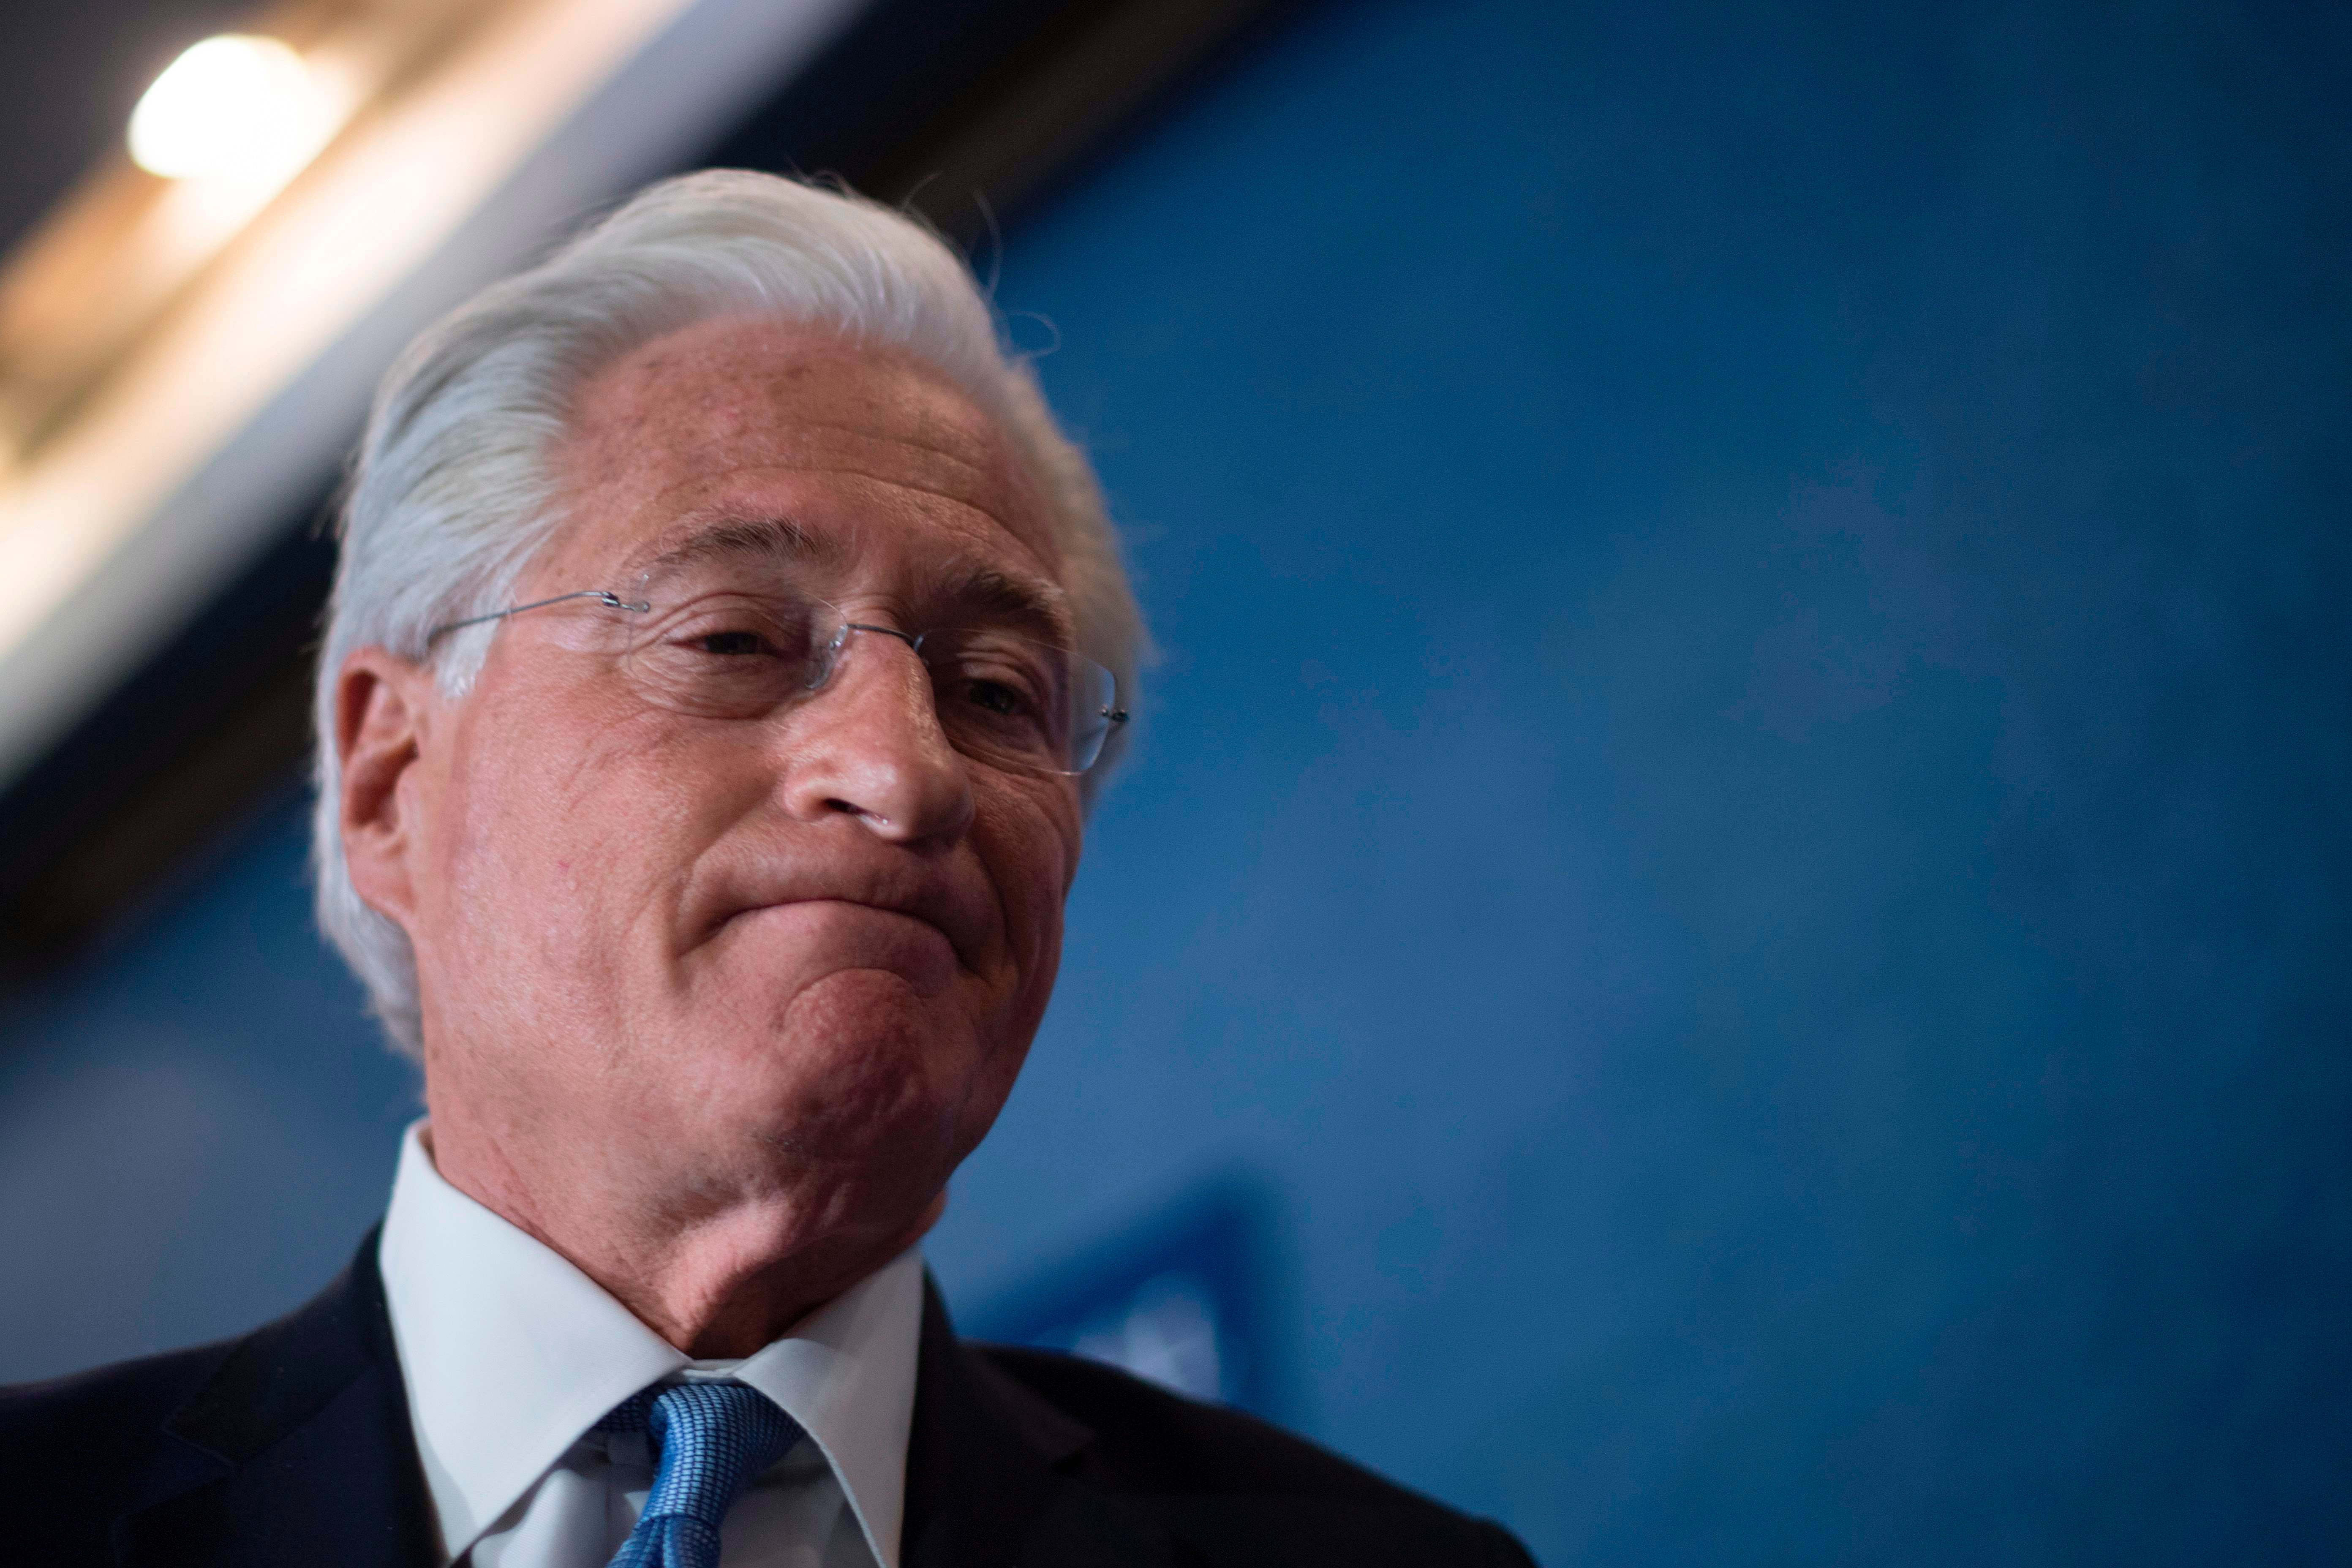 President Trump’s Attorney, Marc Kasowitz Threatened Someone Over Email
